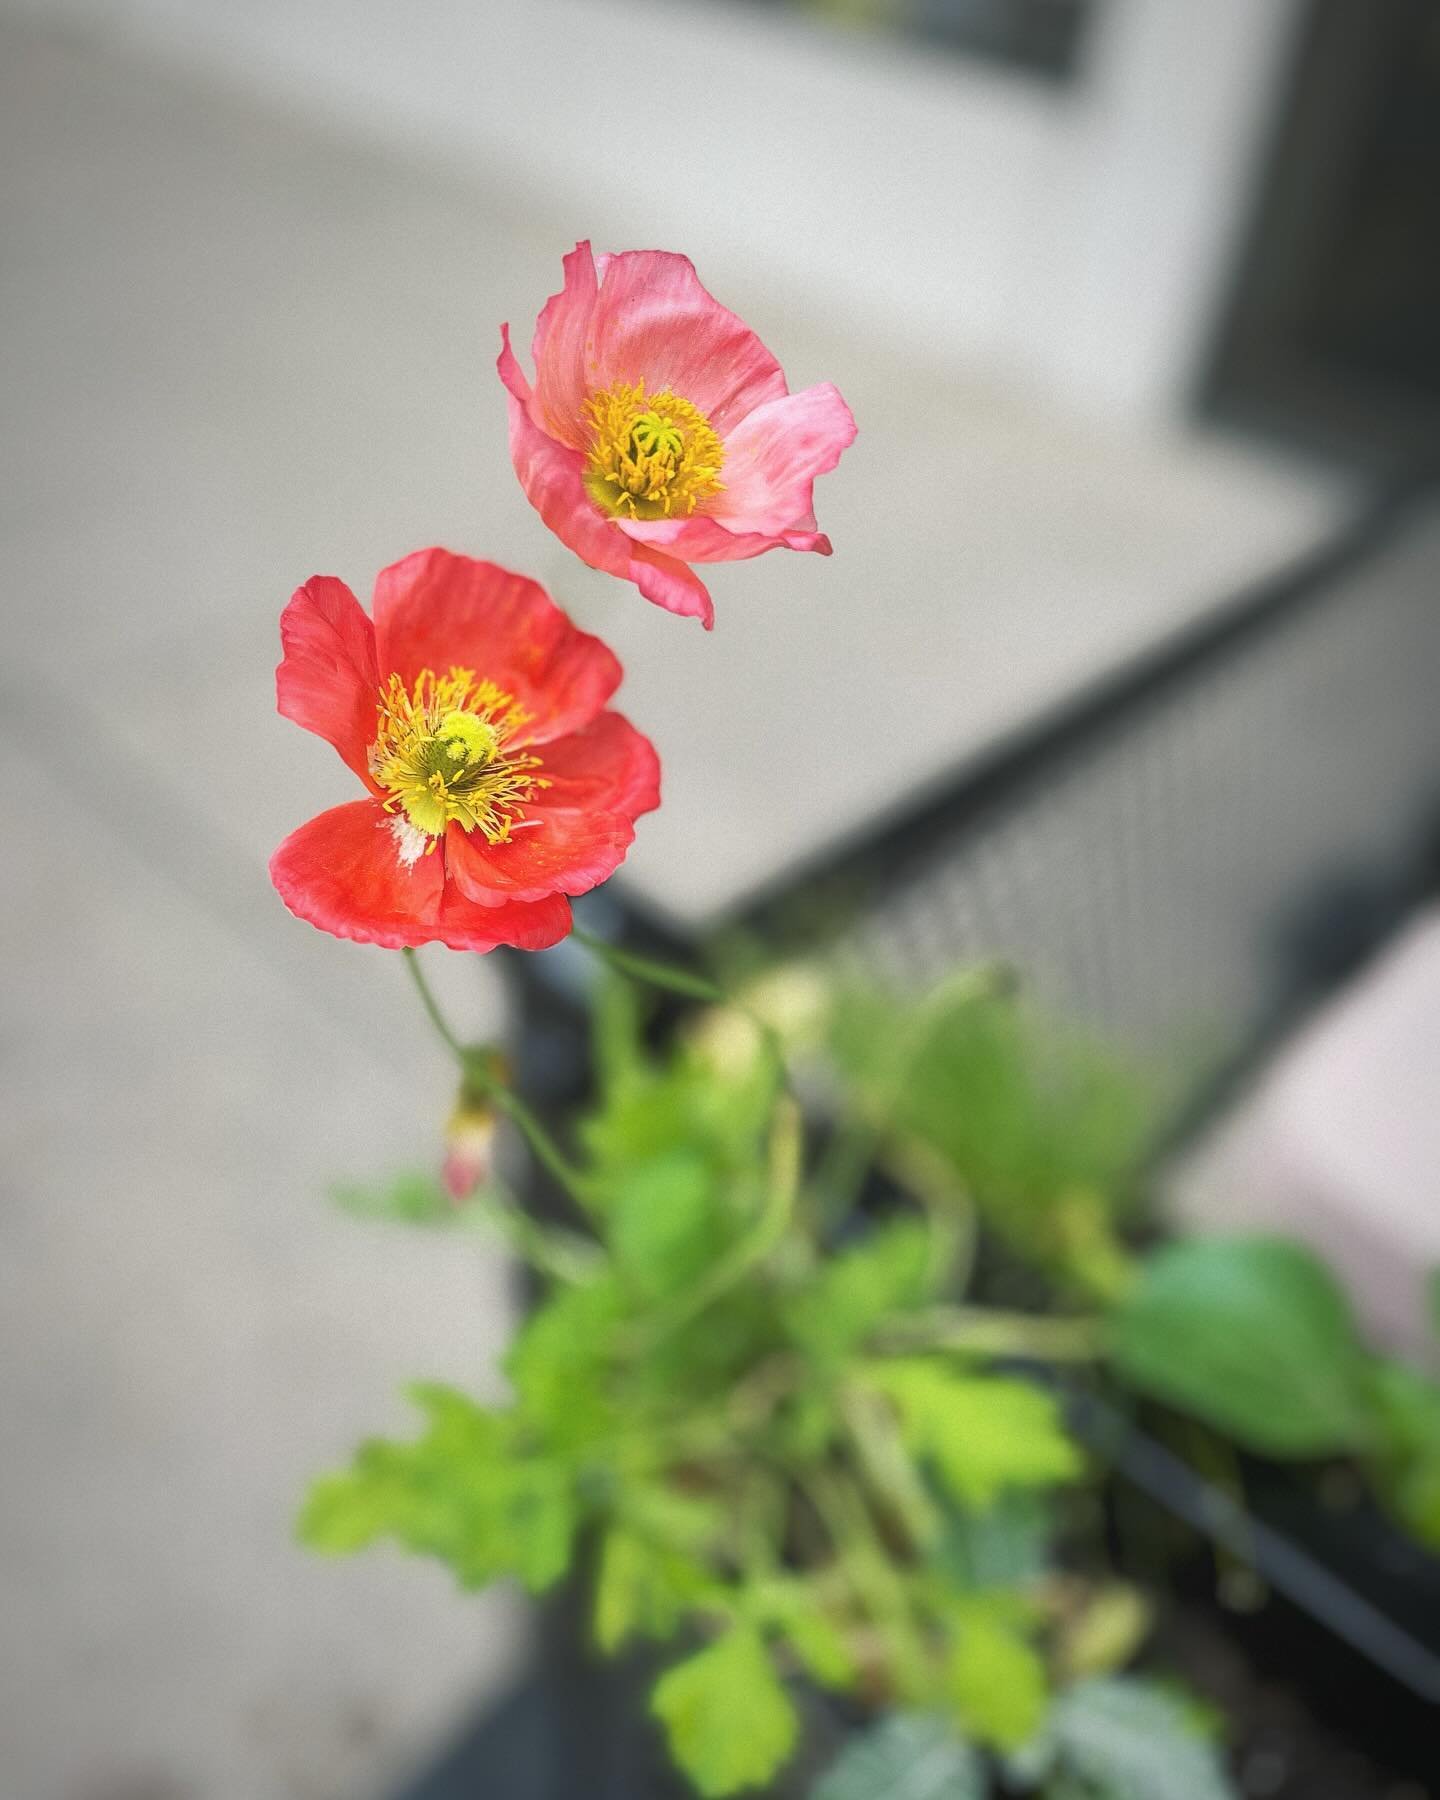 Patio&rsquo;s poppin&rsquo;. Dine al fresco and enjoy the sunshine. Open today 8am-2pm!

#springtime #poppies #botanyorbust #patio #sunshinedaydream #patioseason #goodfood #fromscratch #birdstheword #theearlybirdeatery #dtsouthbend #indianafood #sout